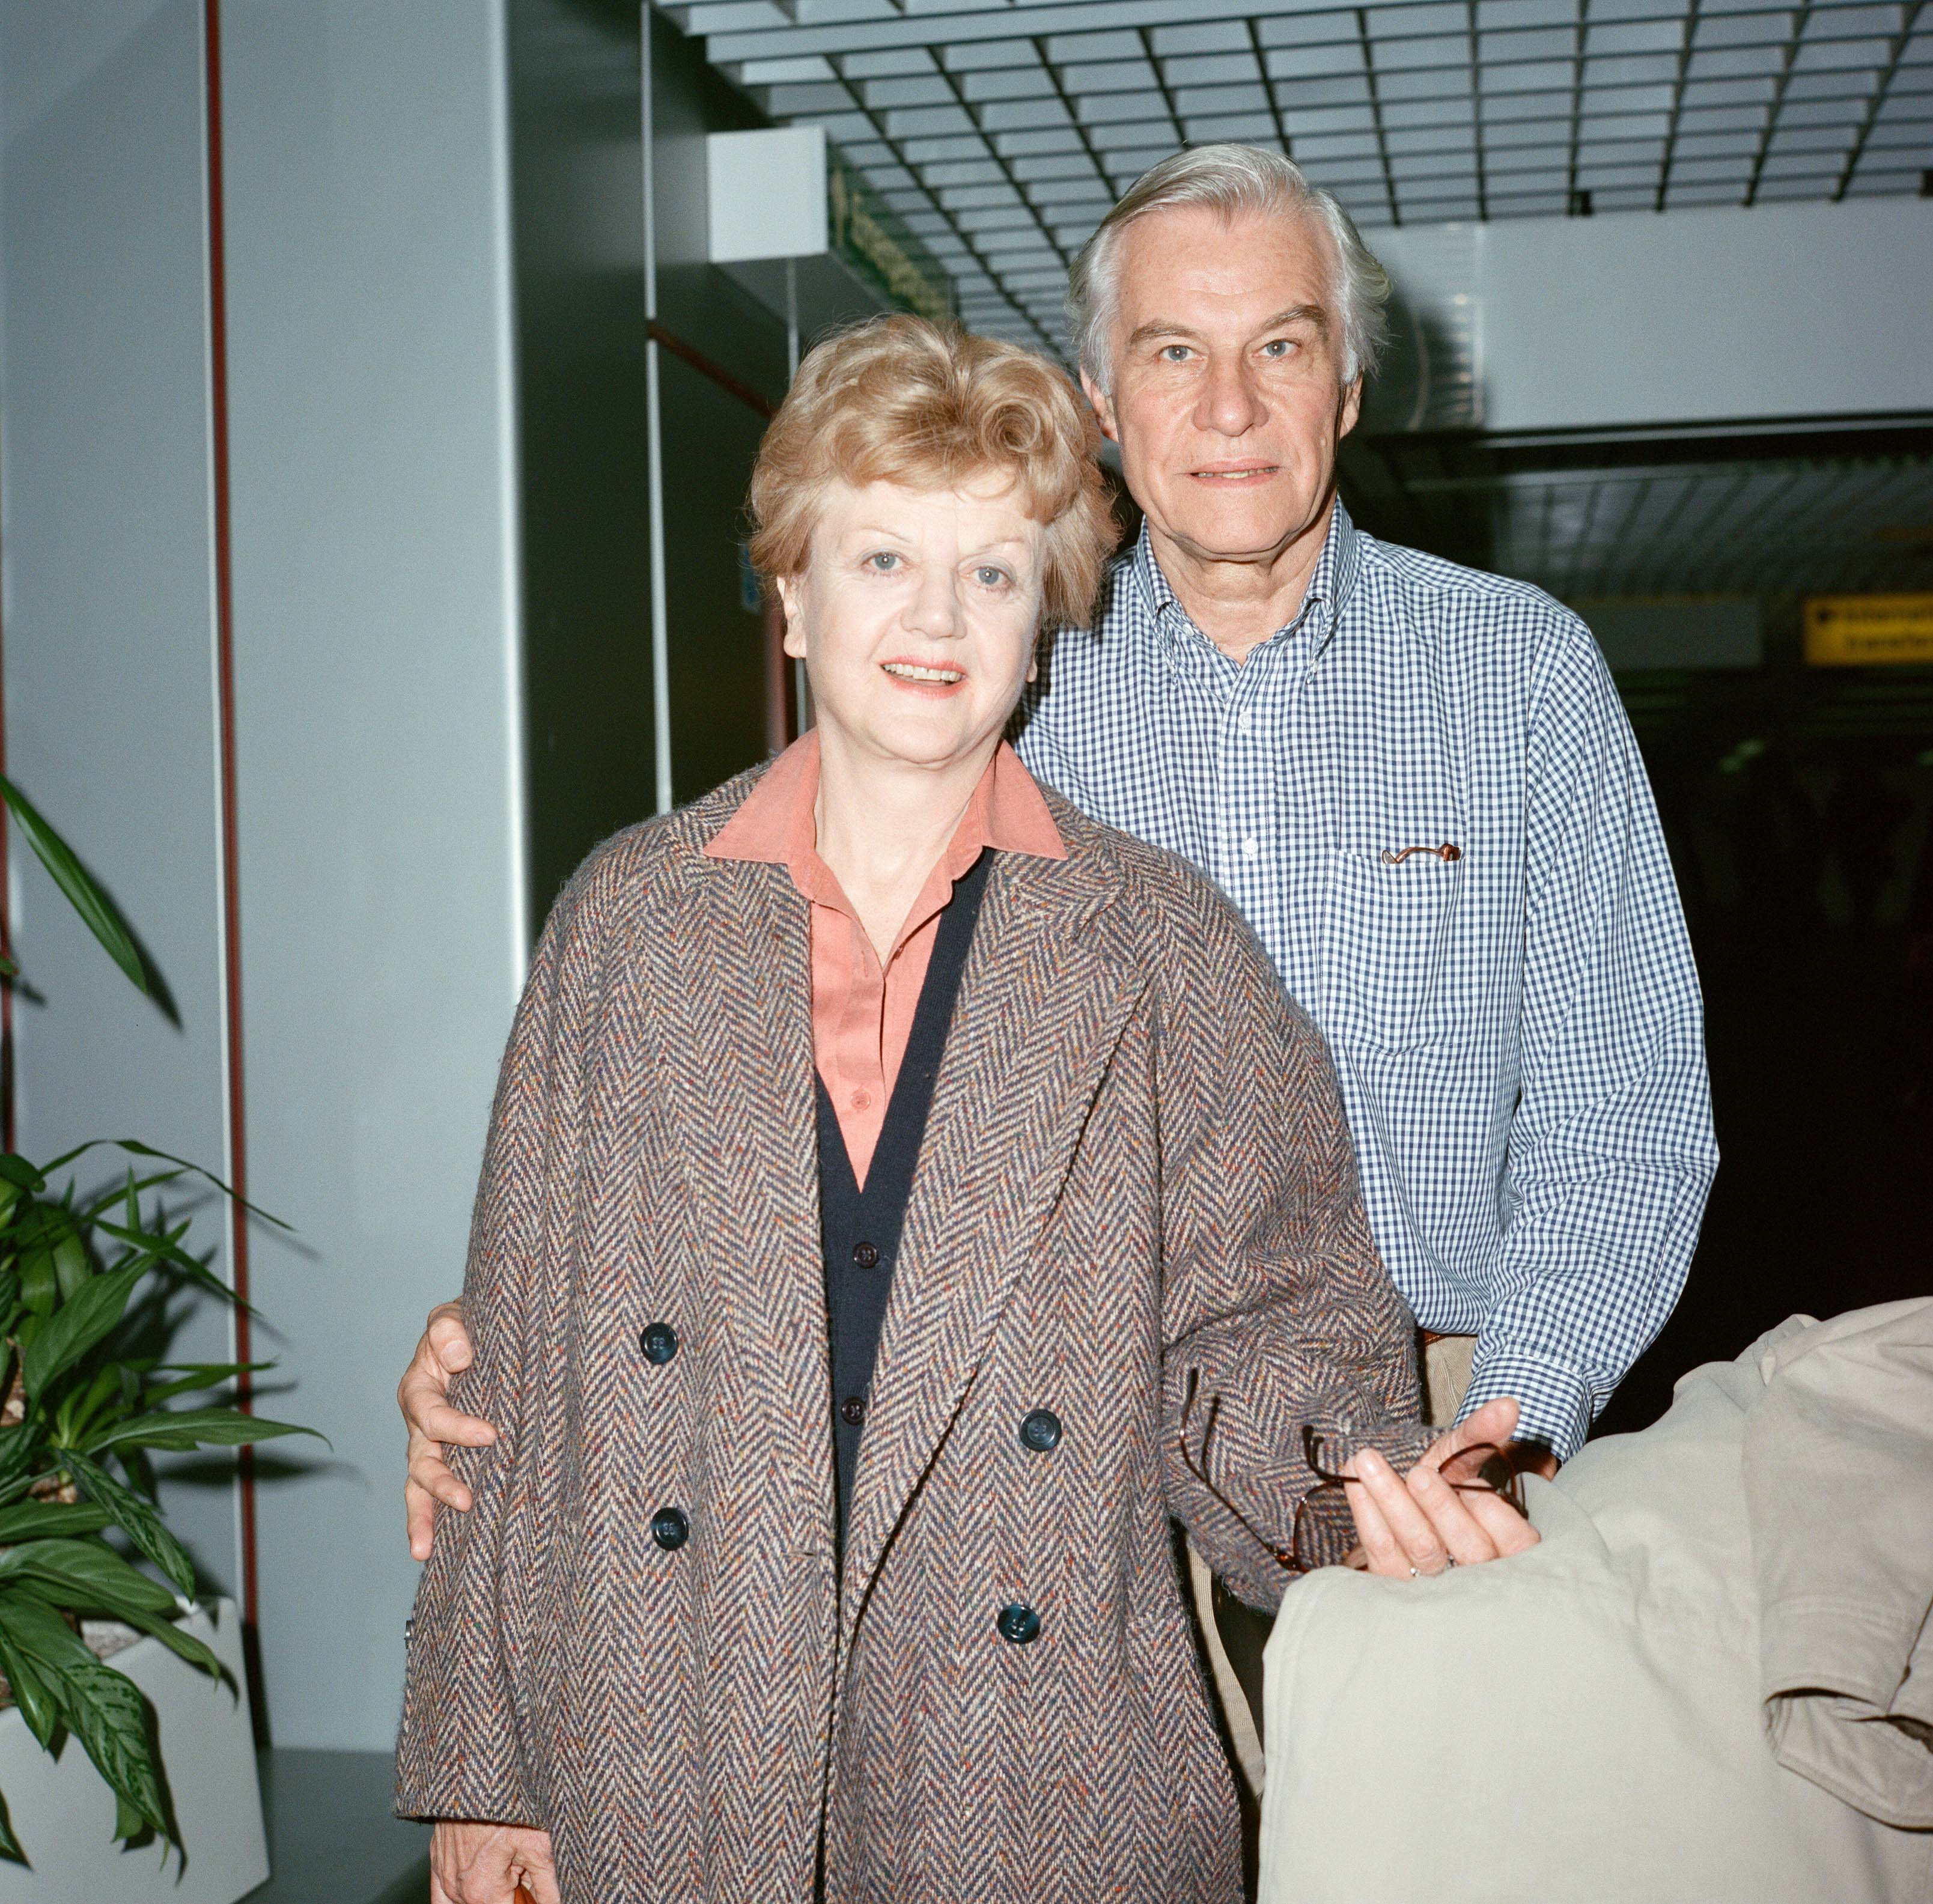 Angela Lansbury and Peter Shaw pose for a photo at the London Airport on March 13, 1990 | Source: Getty Images